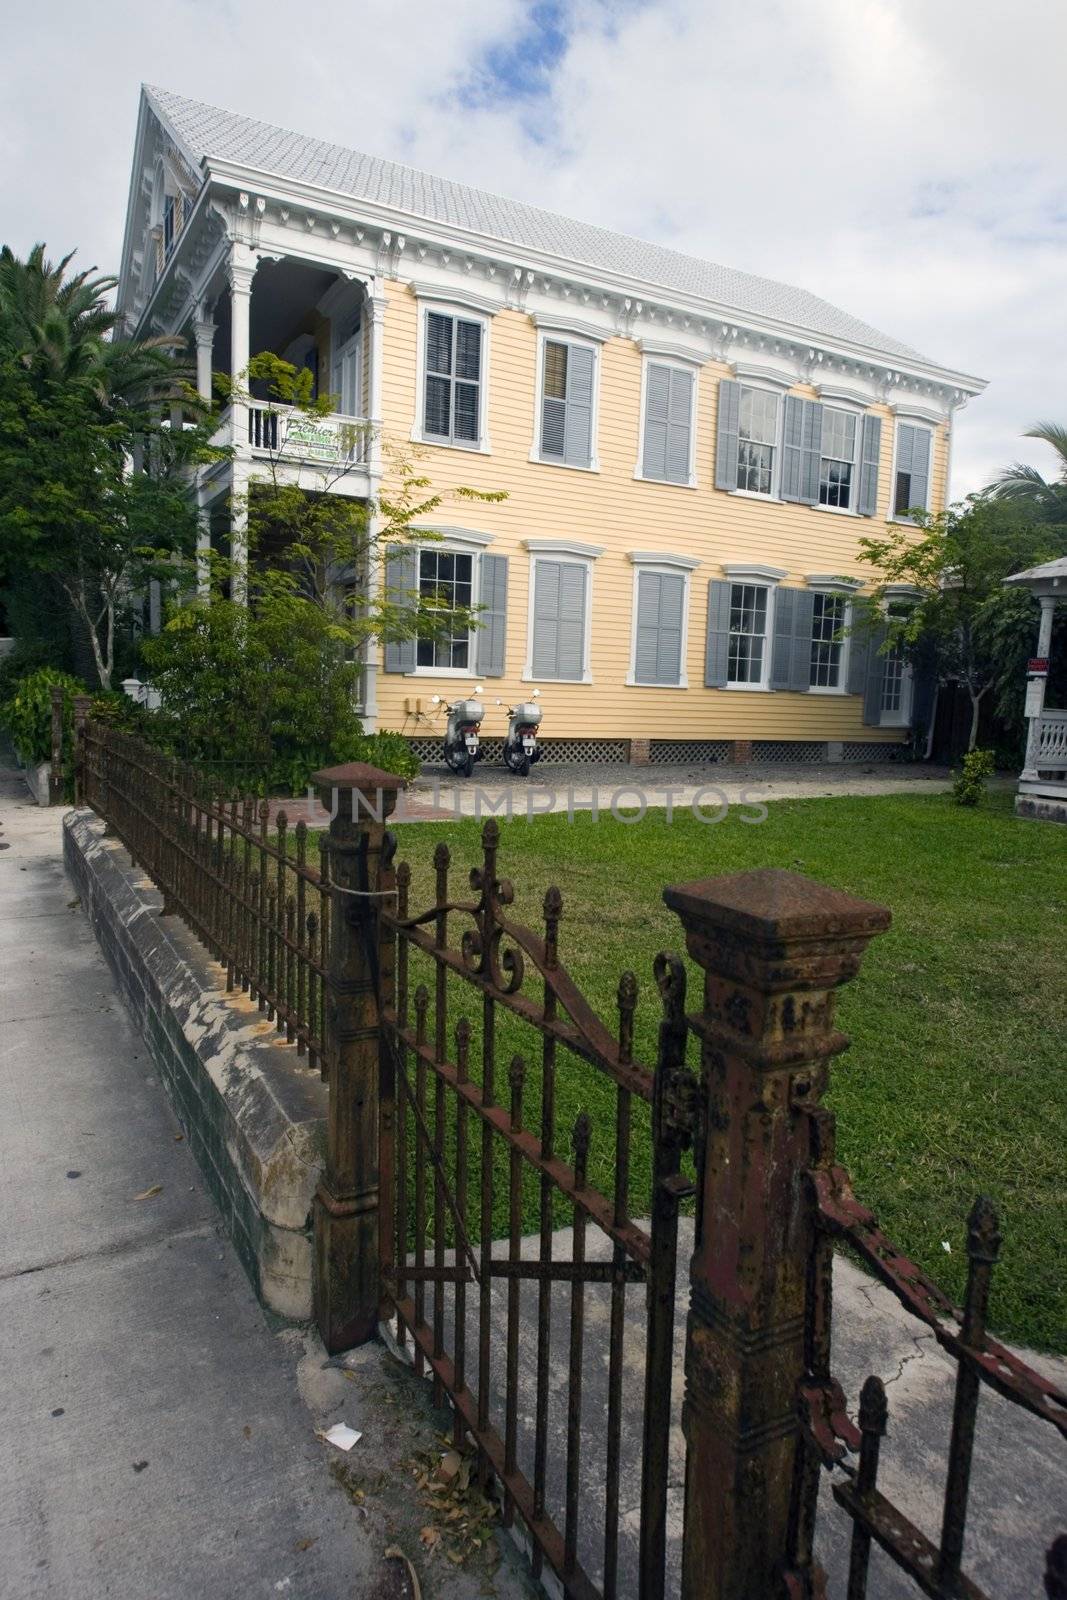 House in Key West, Florida